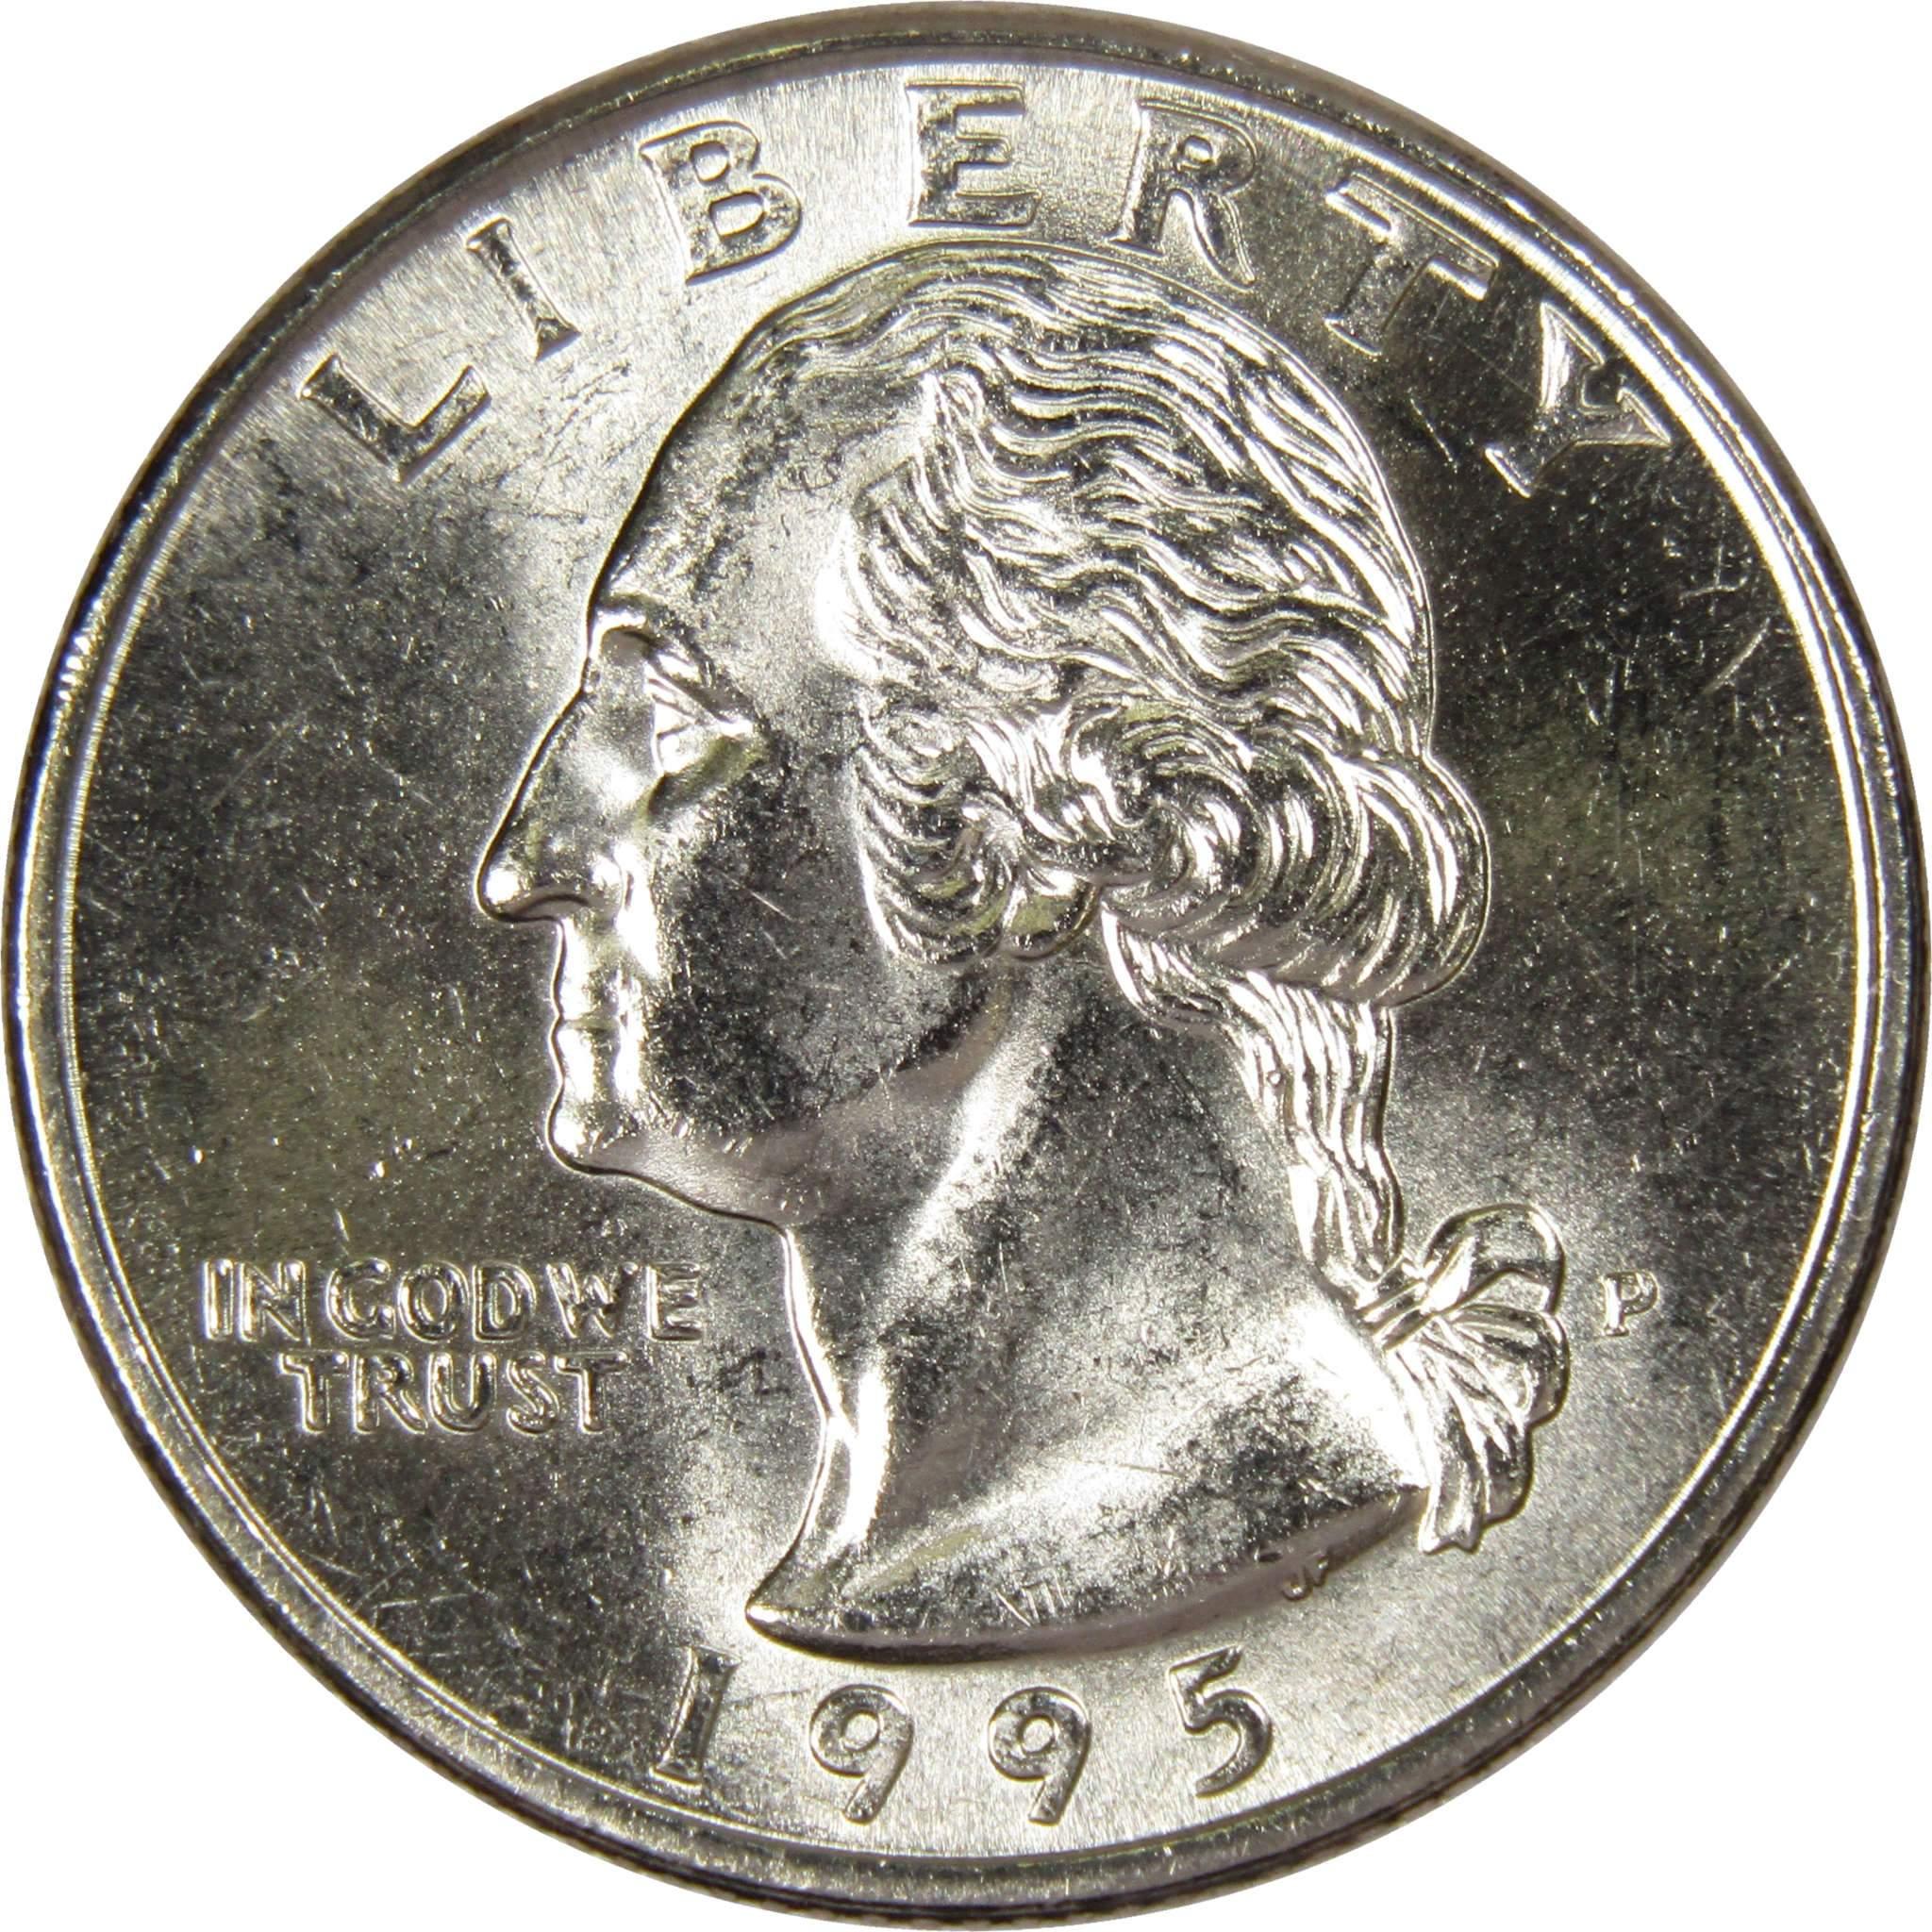 1995 P Washington Quarter BU Uncirculated Mint State 25c US Coin Collectible